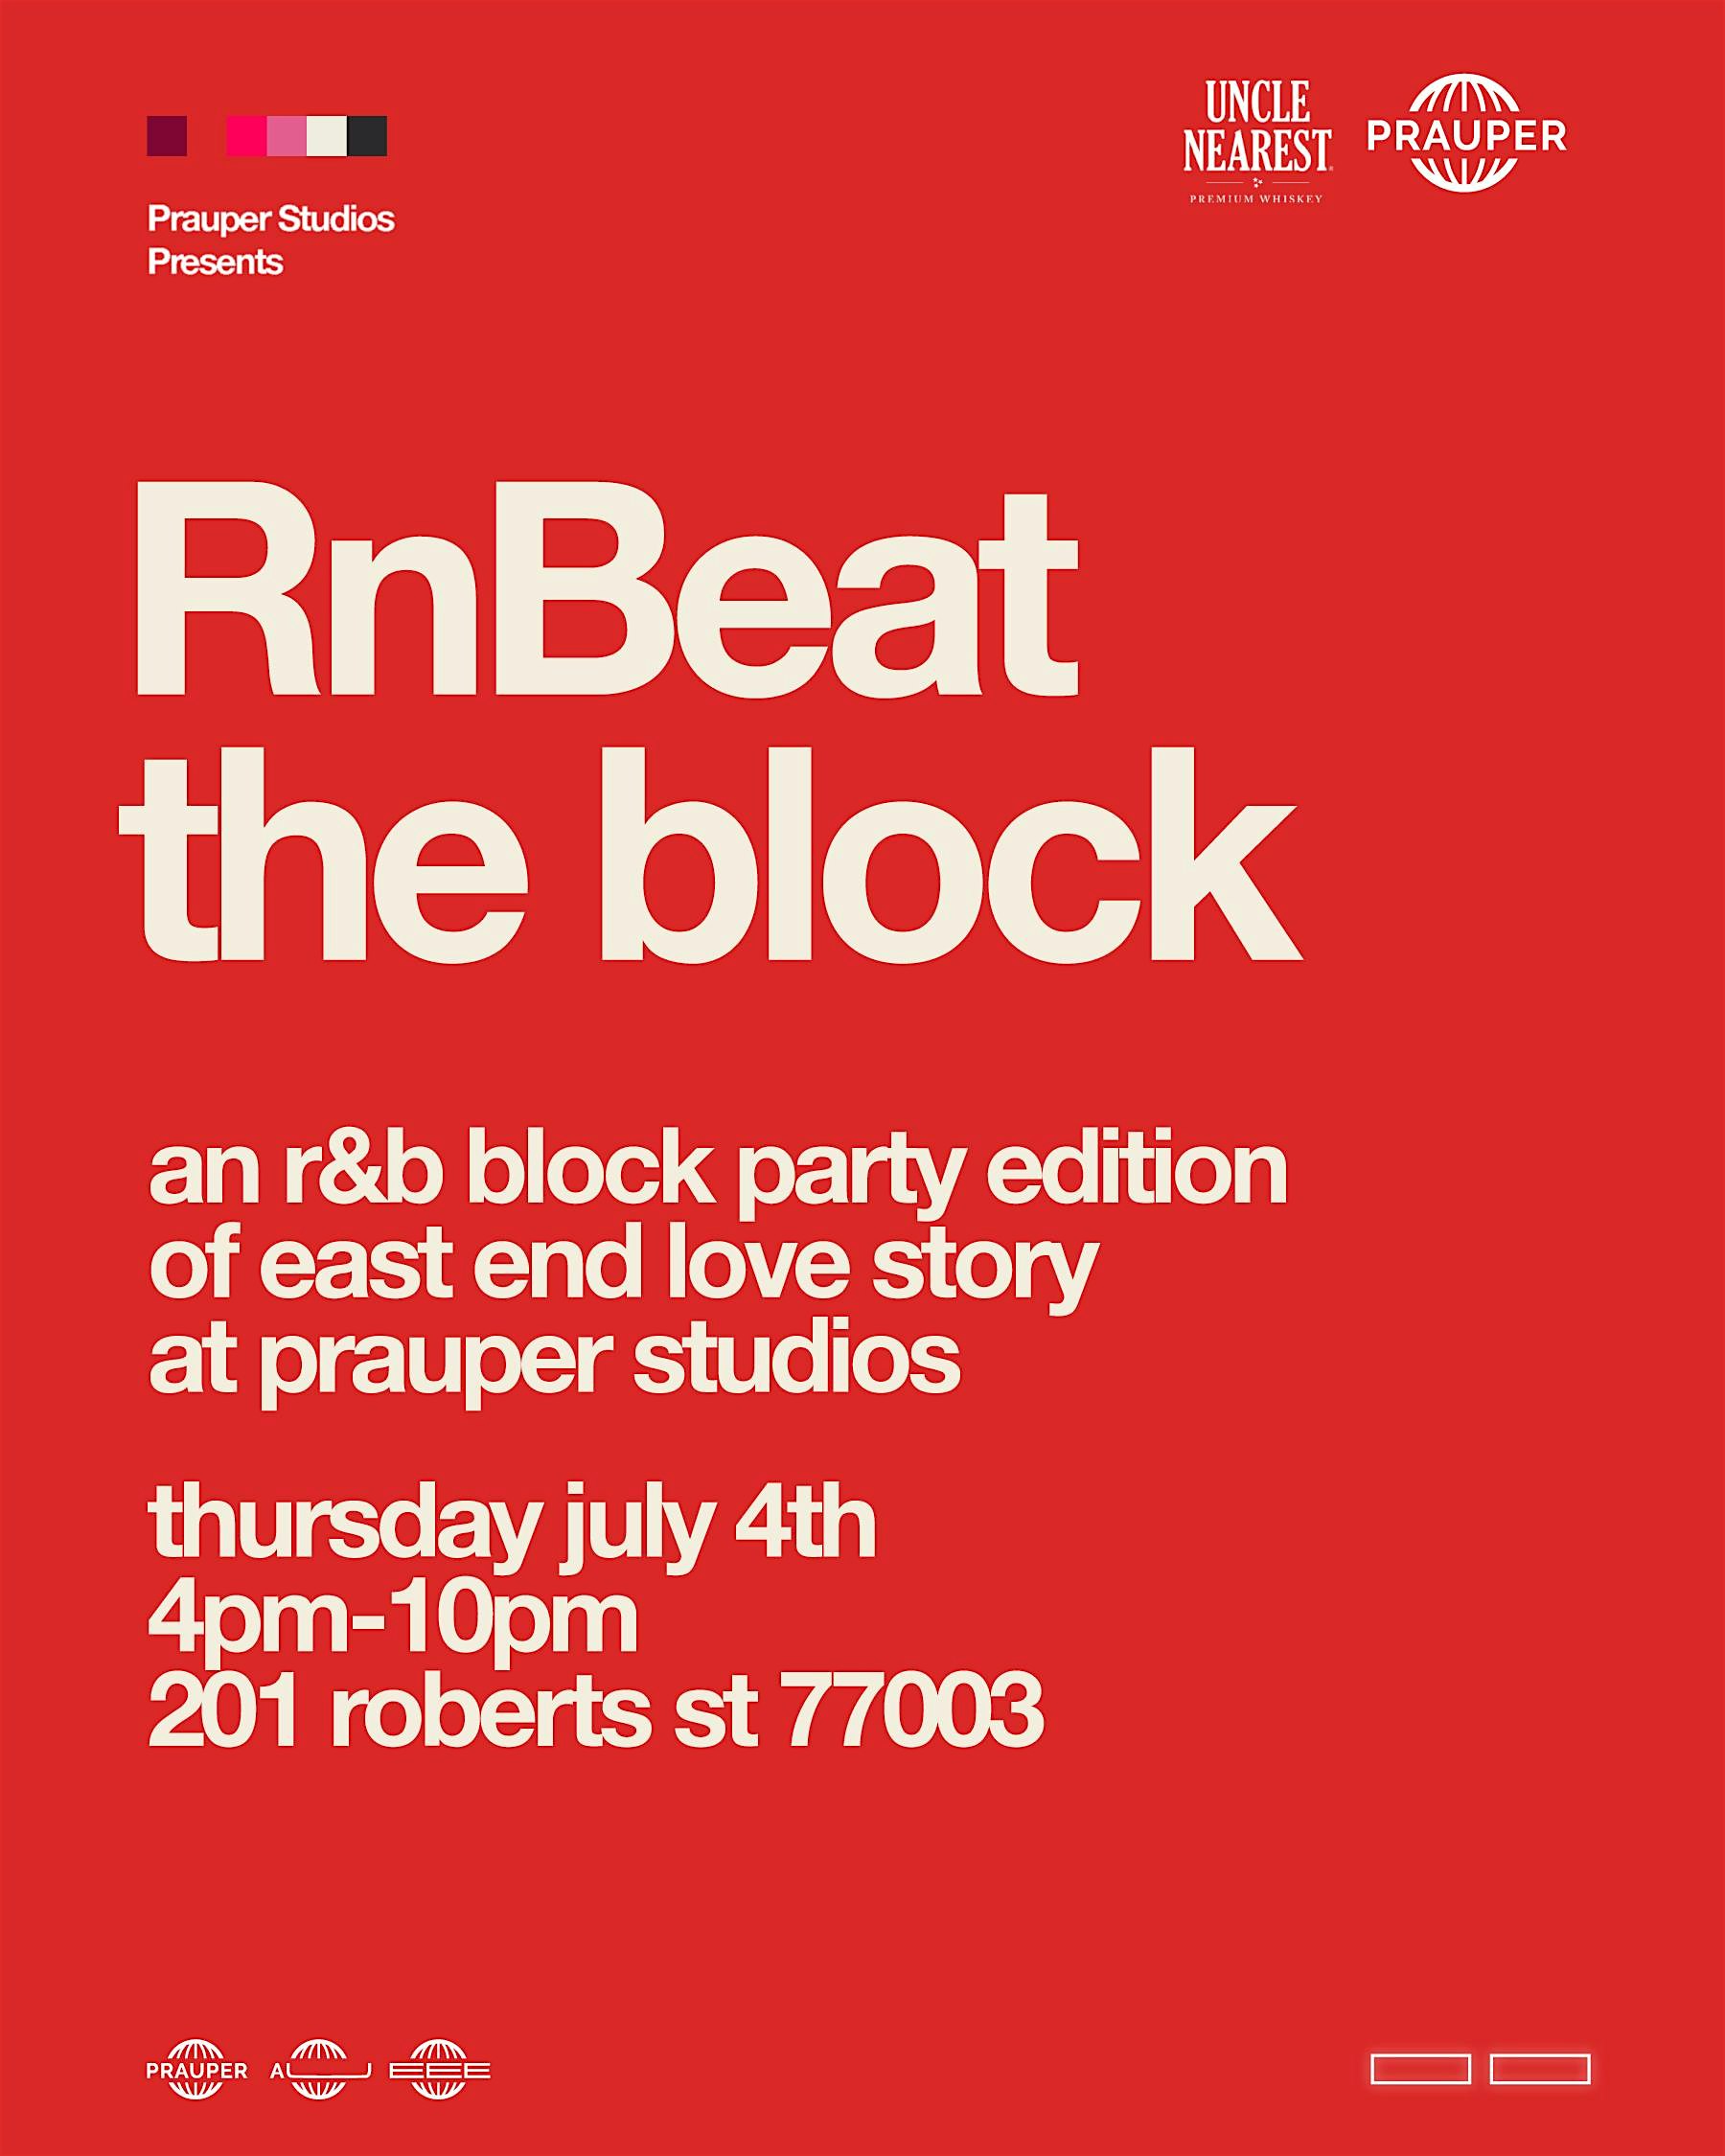 RnBeat The Block Presale: An R&B Block Party in the East End